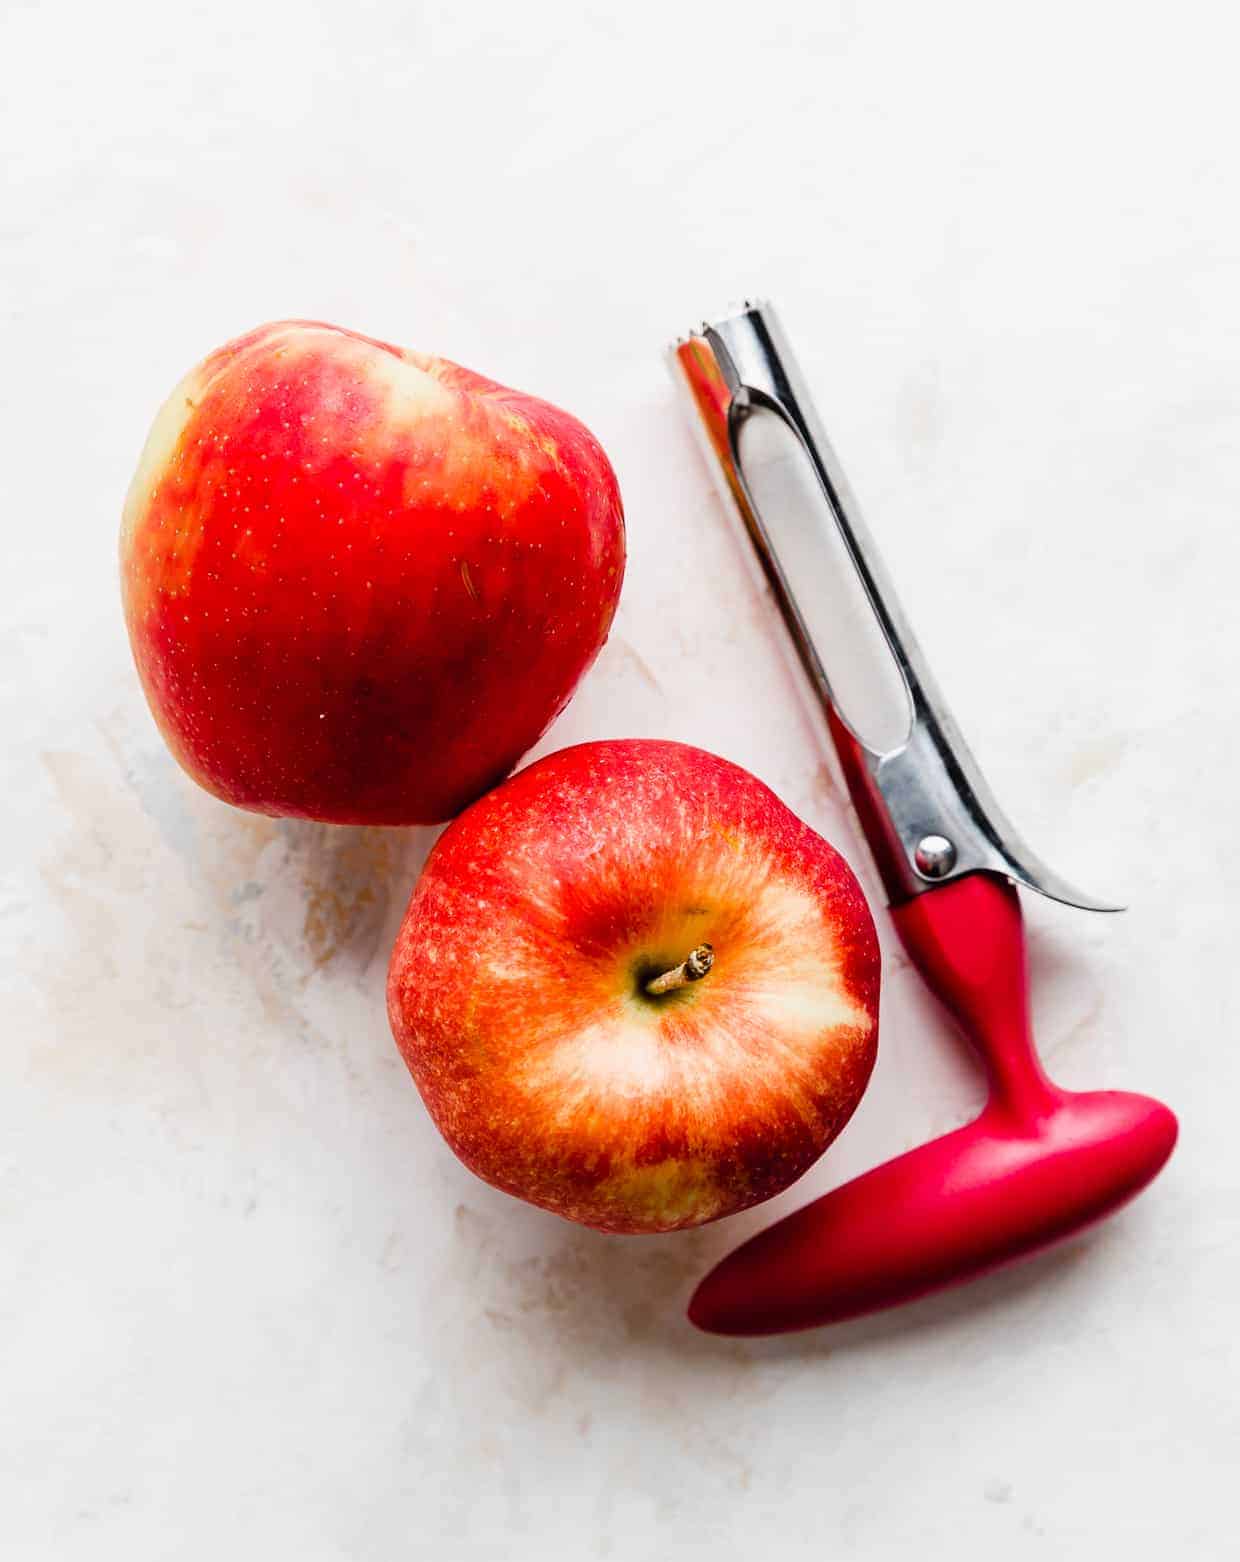 Two red apples against a white background.